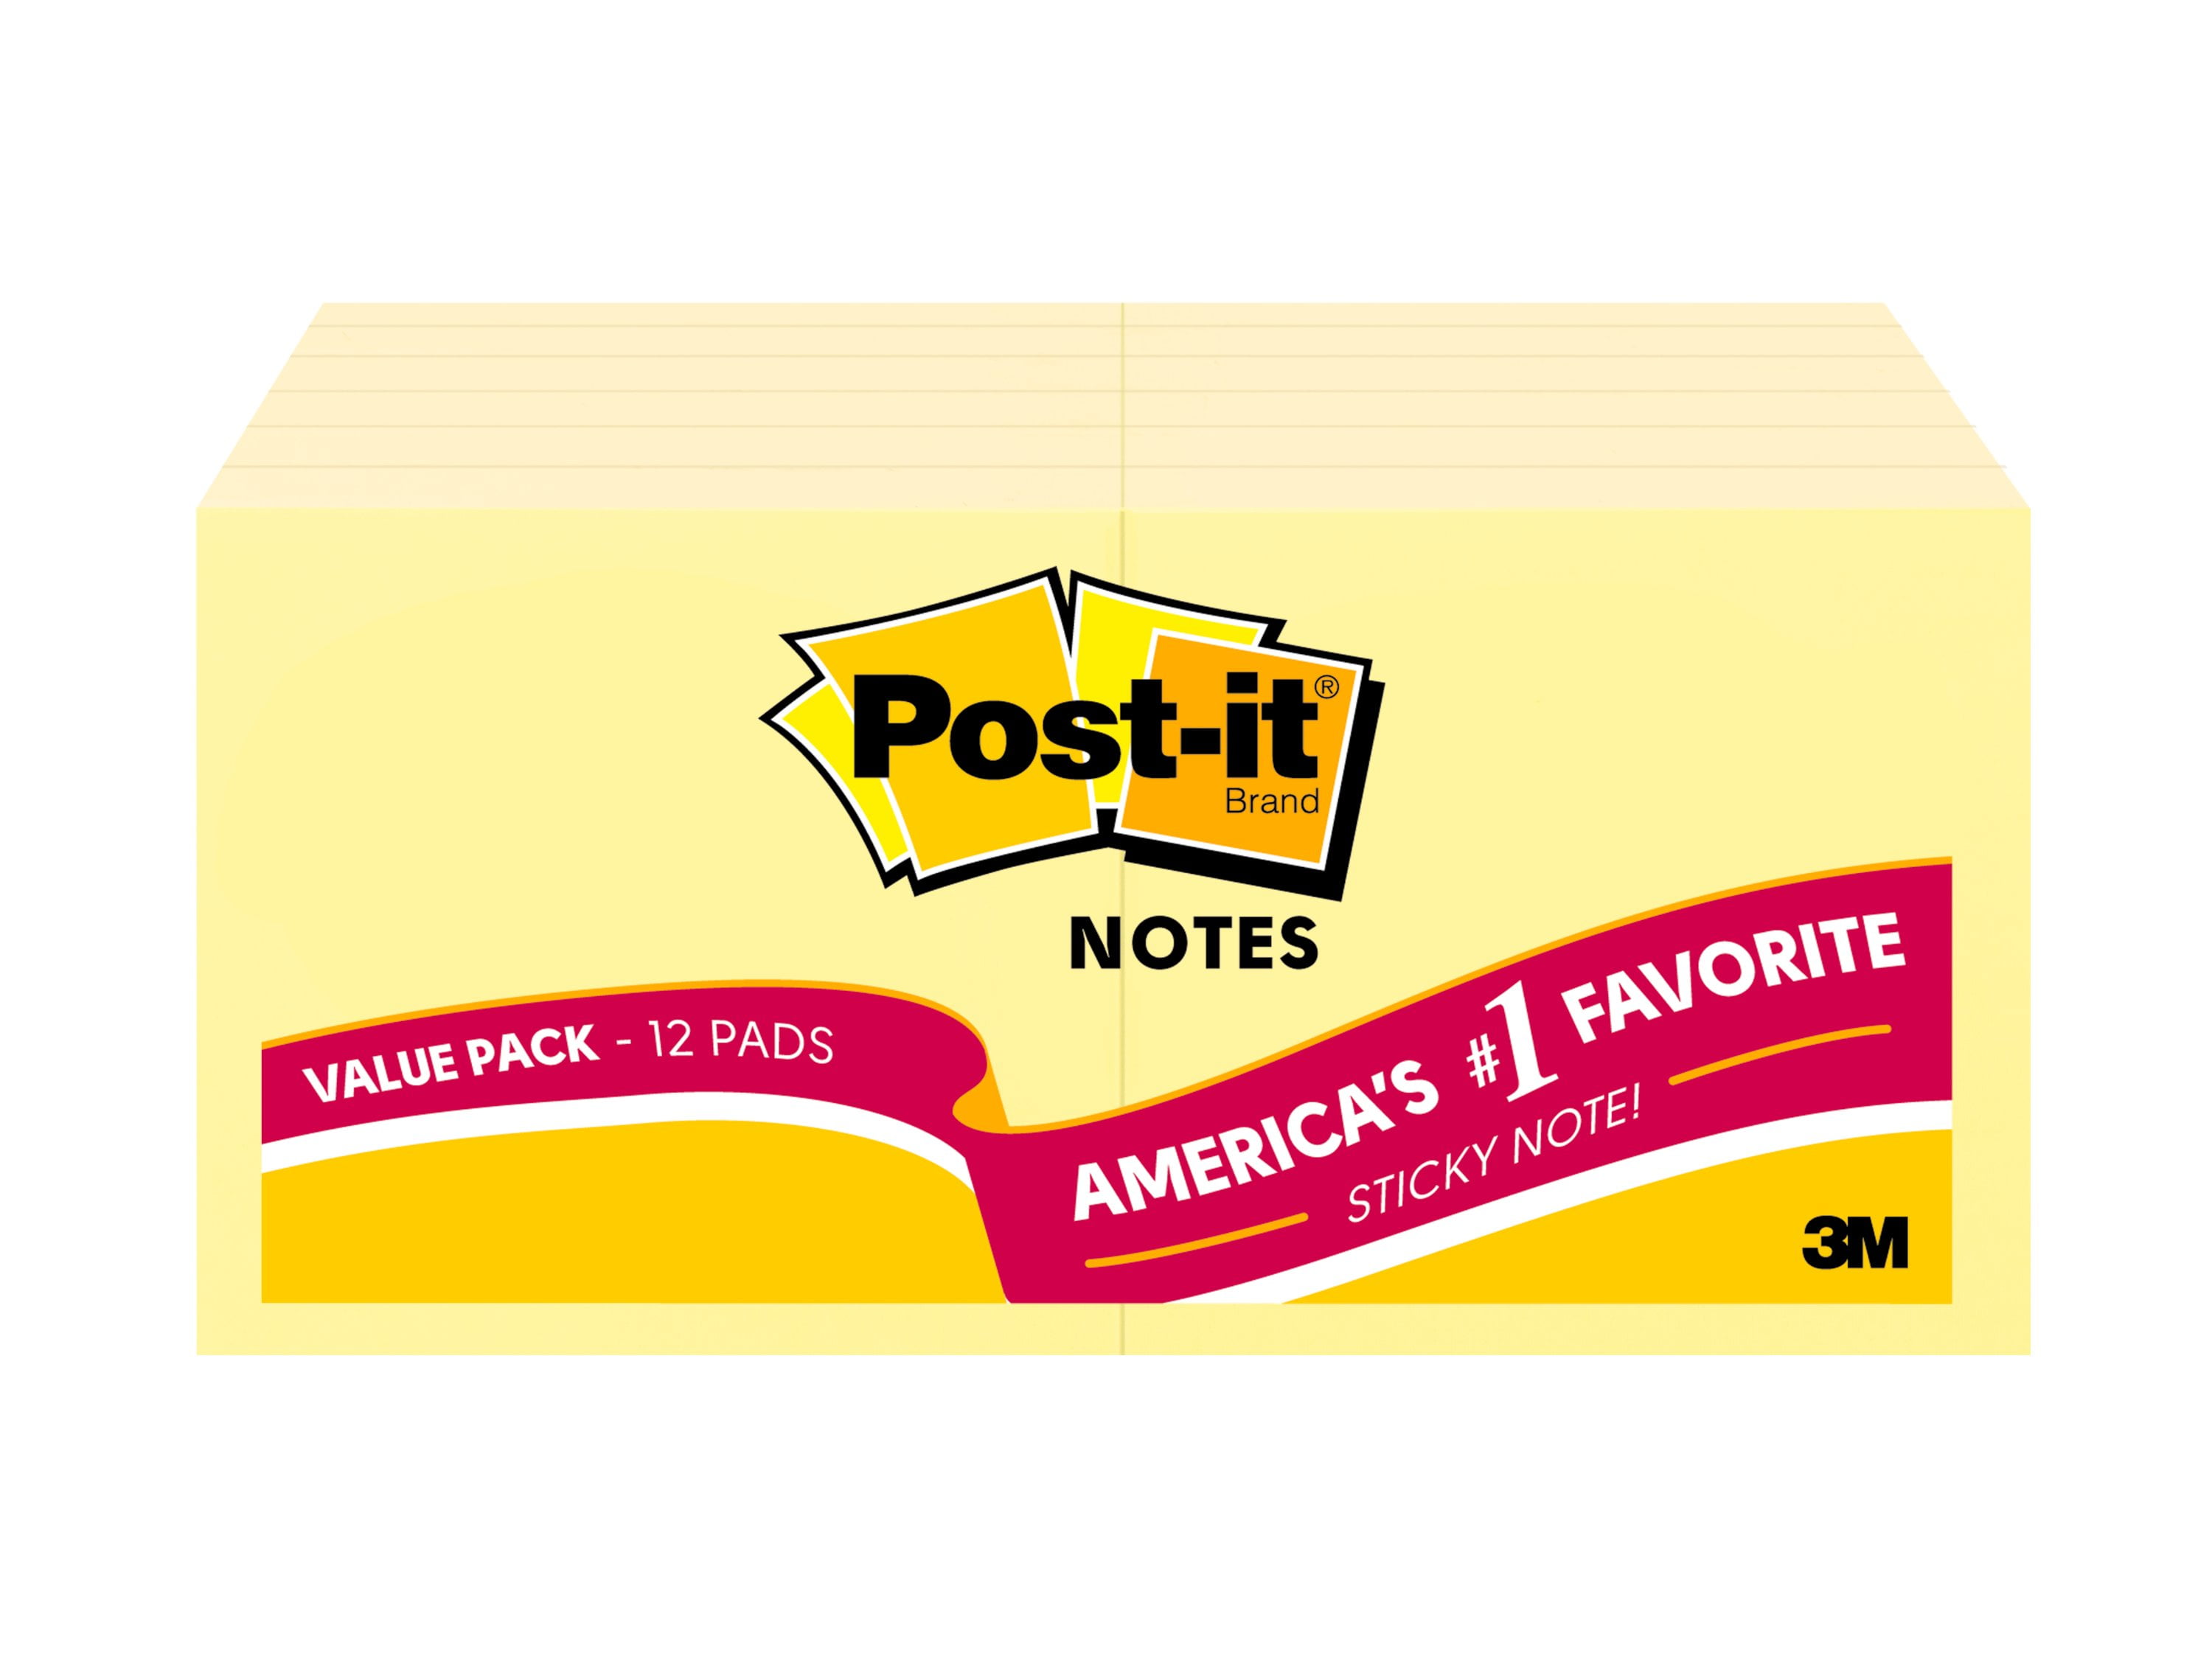 Post-it Super Sticky Notes, Canary Yellow, 3 in. x 5 in., 90 Sheets, 12 Pads